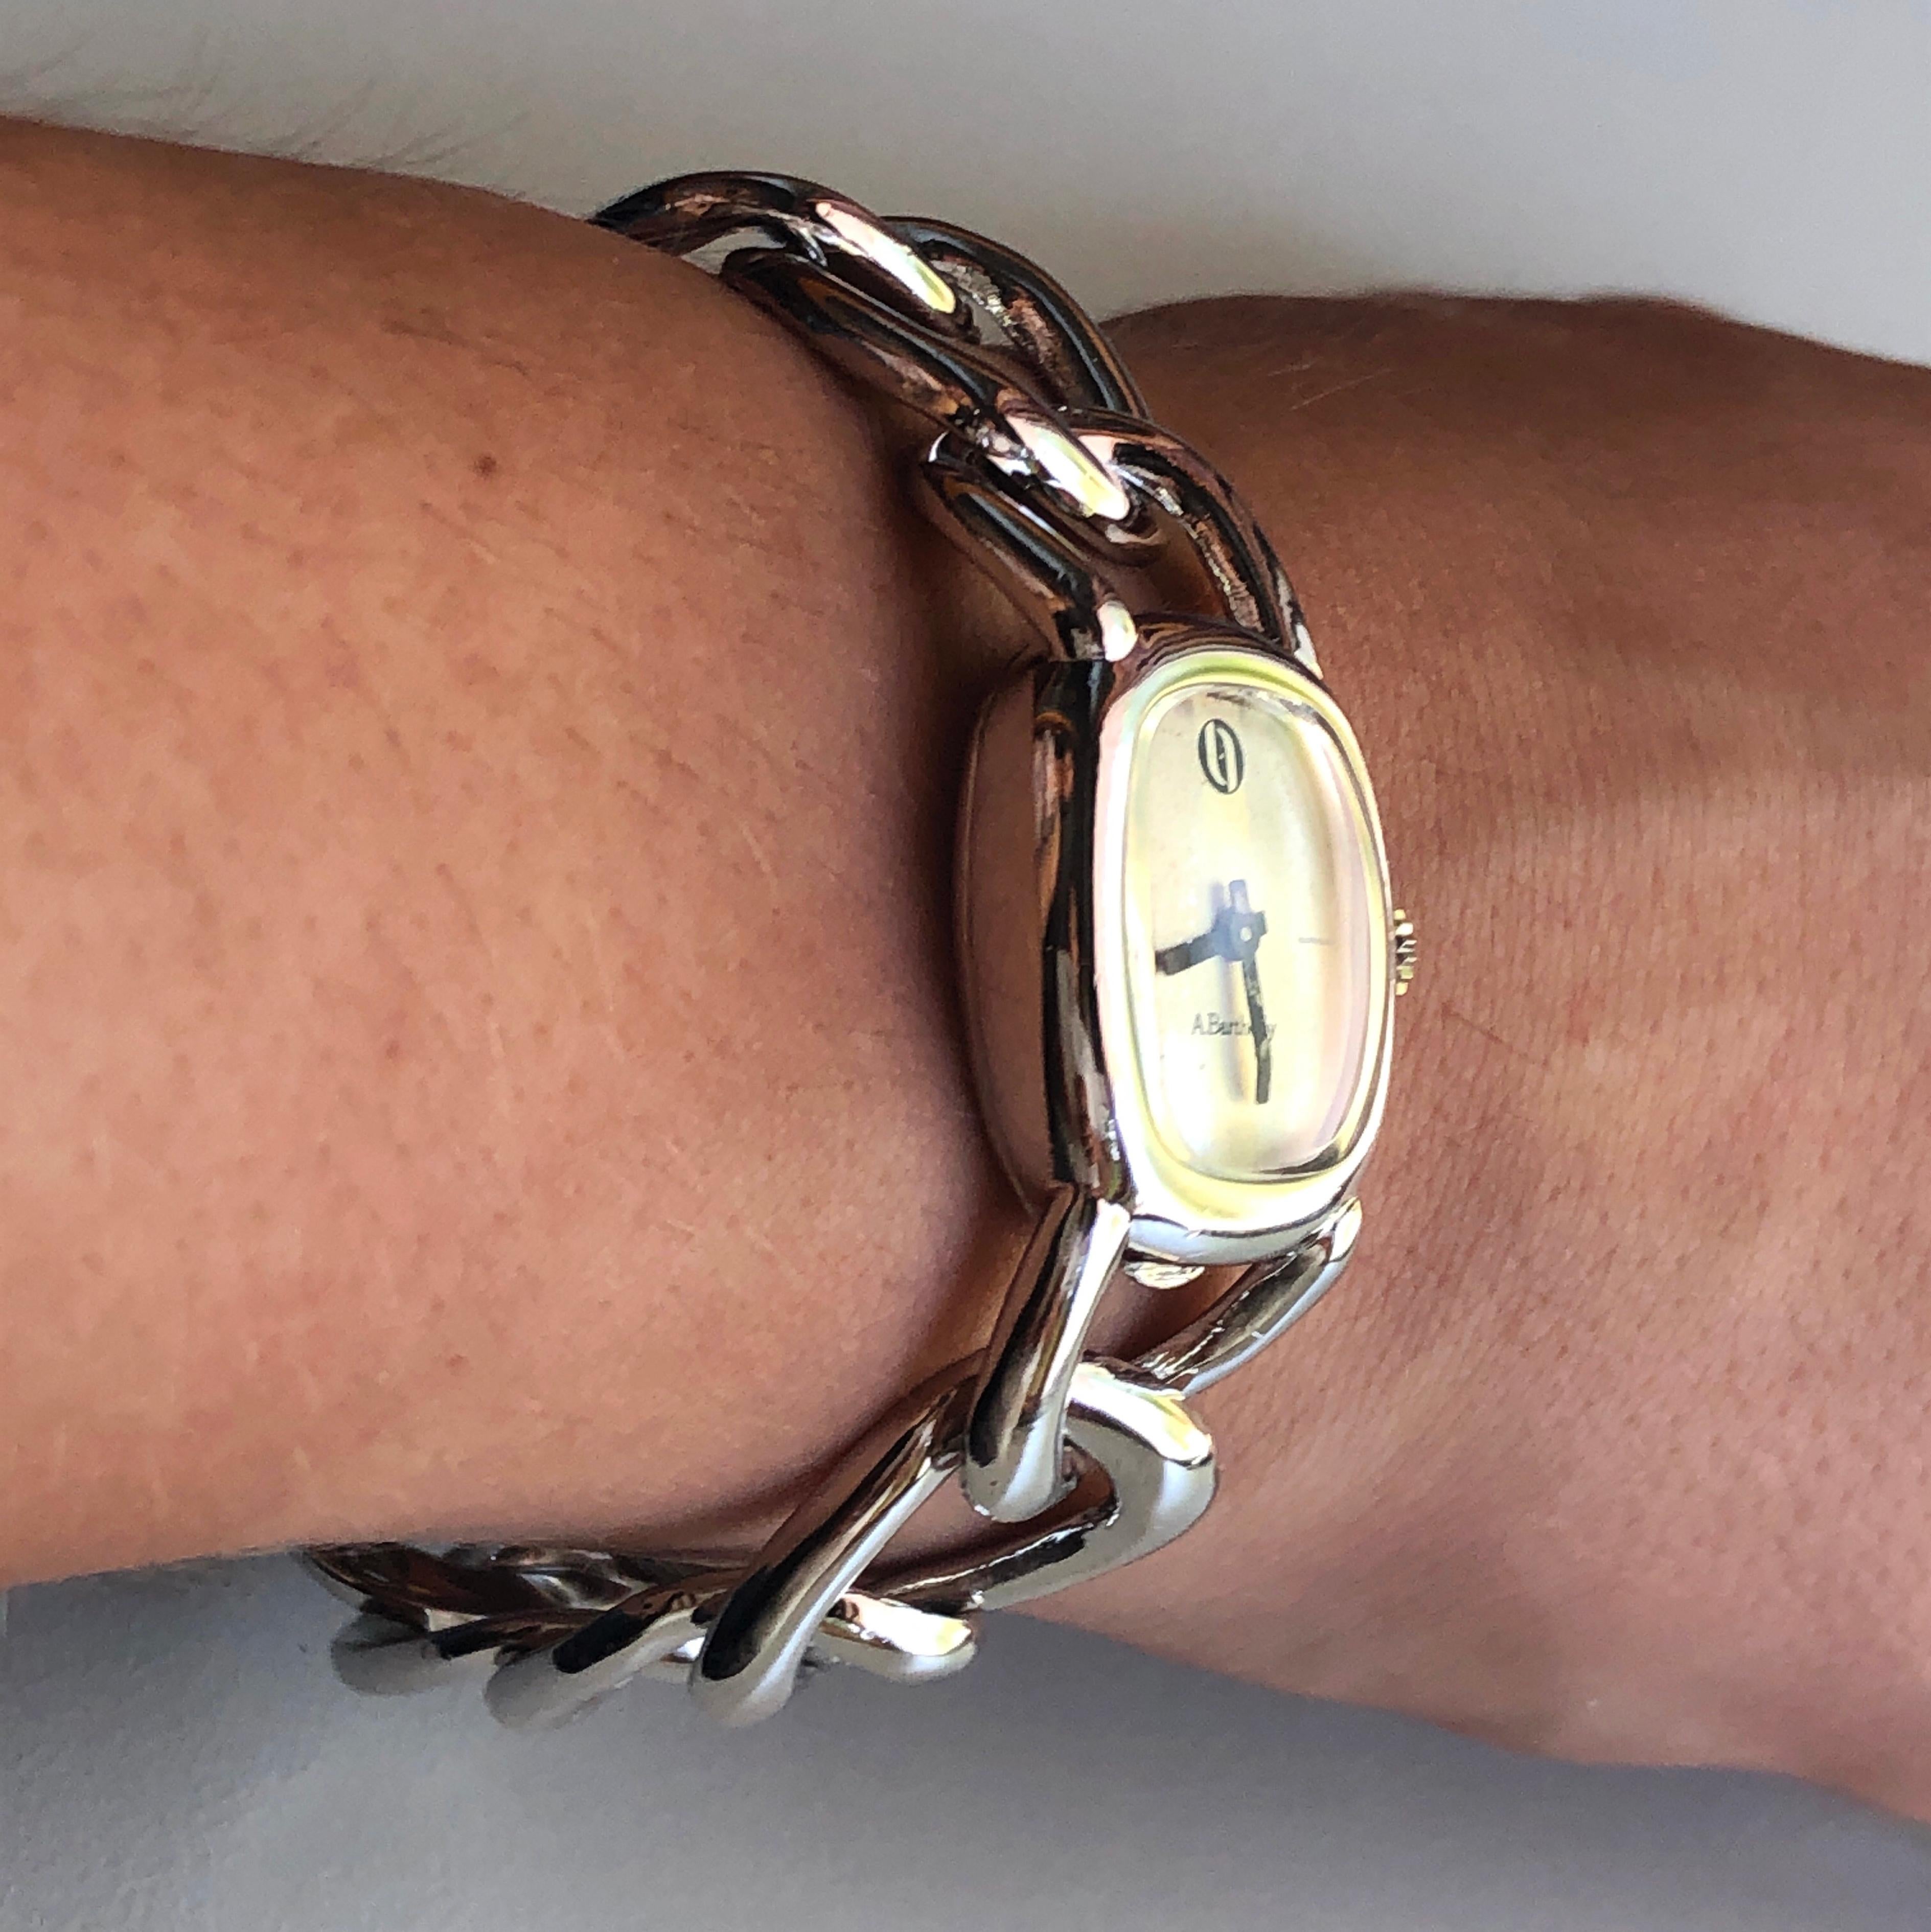 Original 1970s Alexis Barthelay Manual-Winding Movement Chain Silver Watch For Sale 2